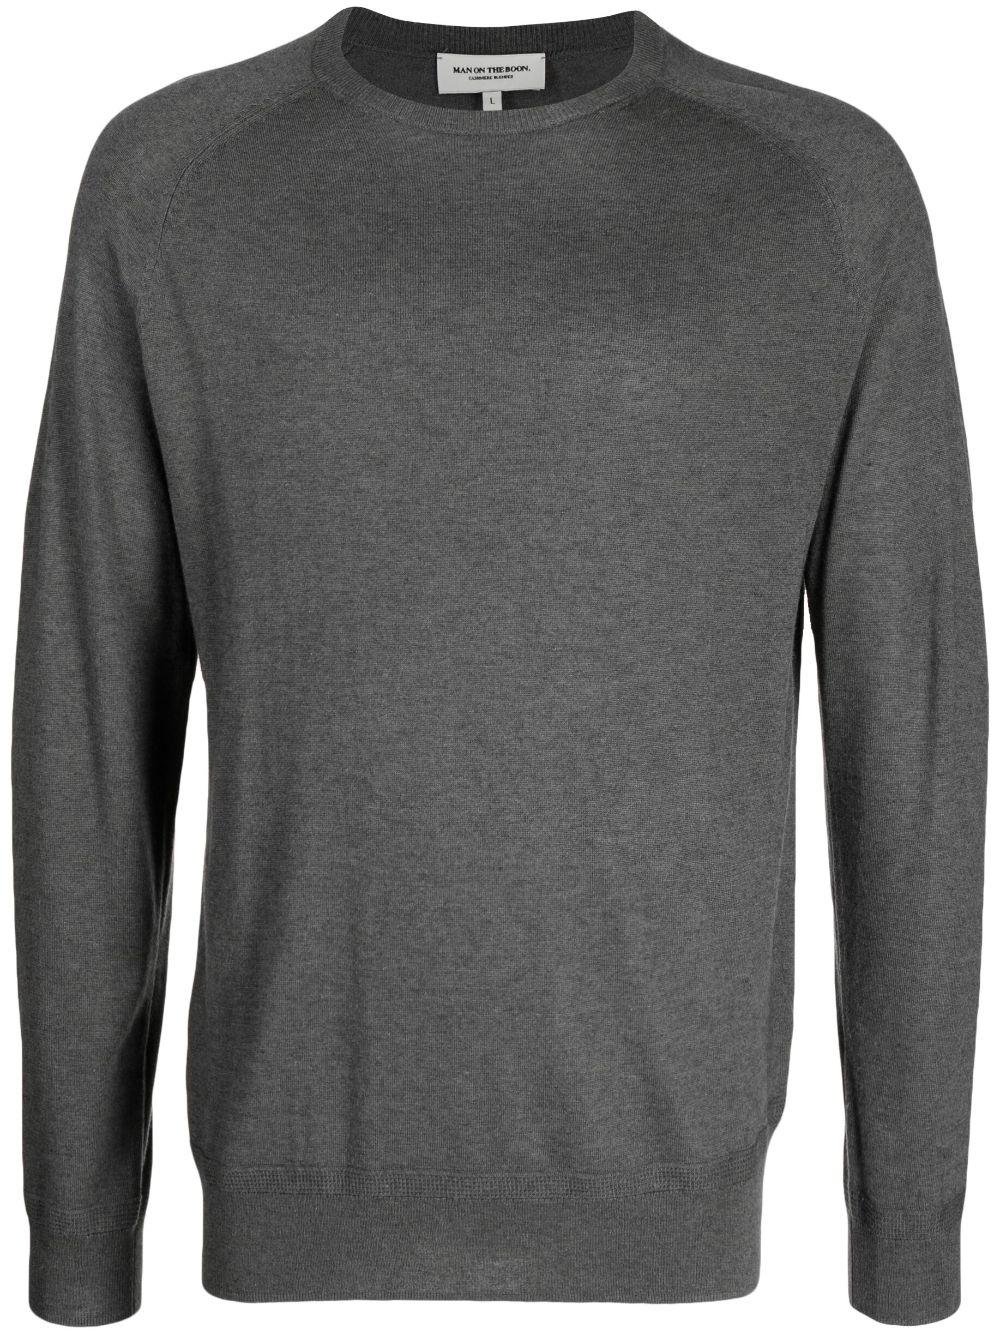 Man On The Boon. Long-sleeve Crew-neck Knitted Jumper In Grey